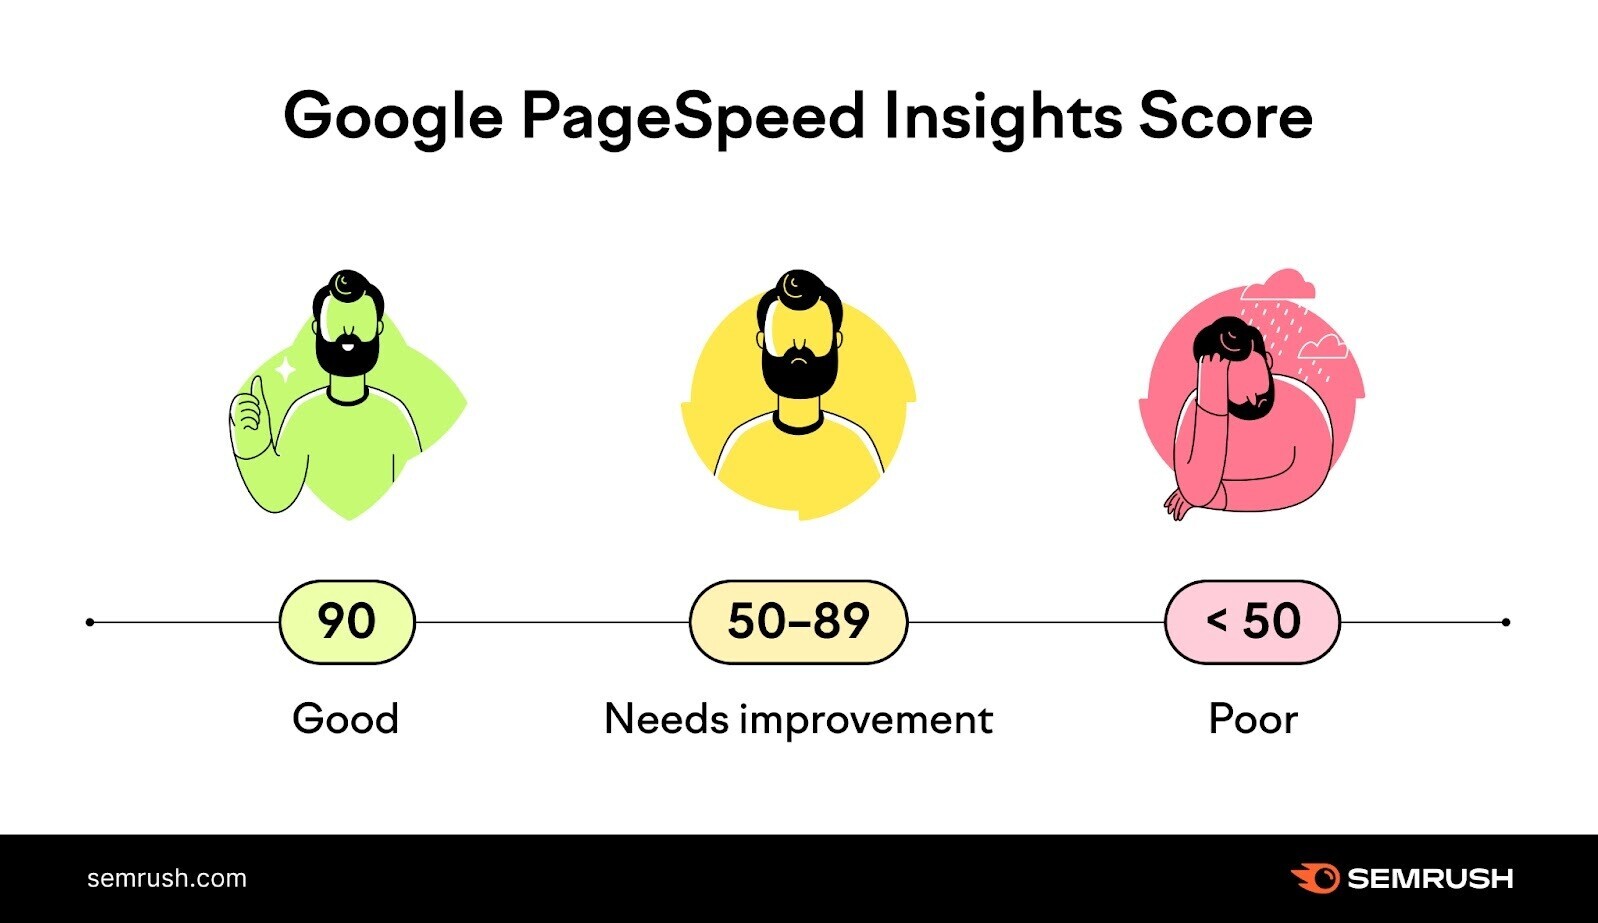 an infographic showing Google PageSpeed insights score